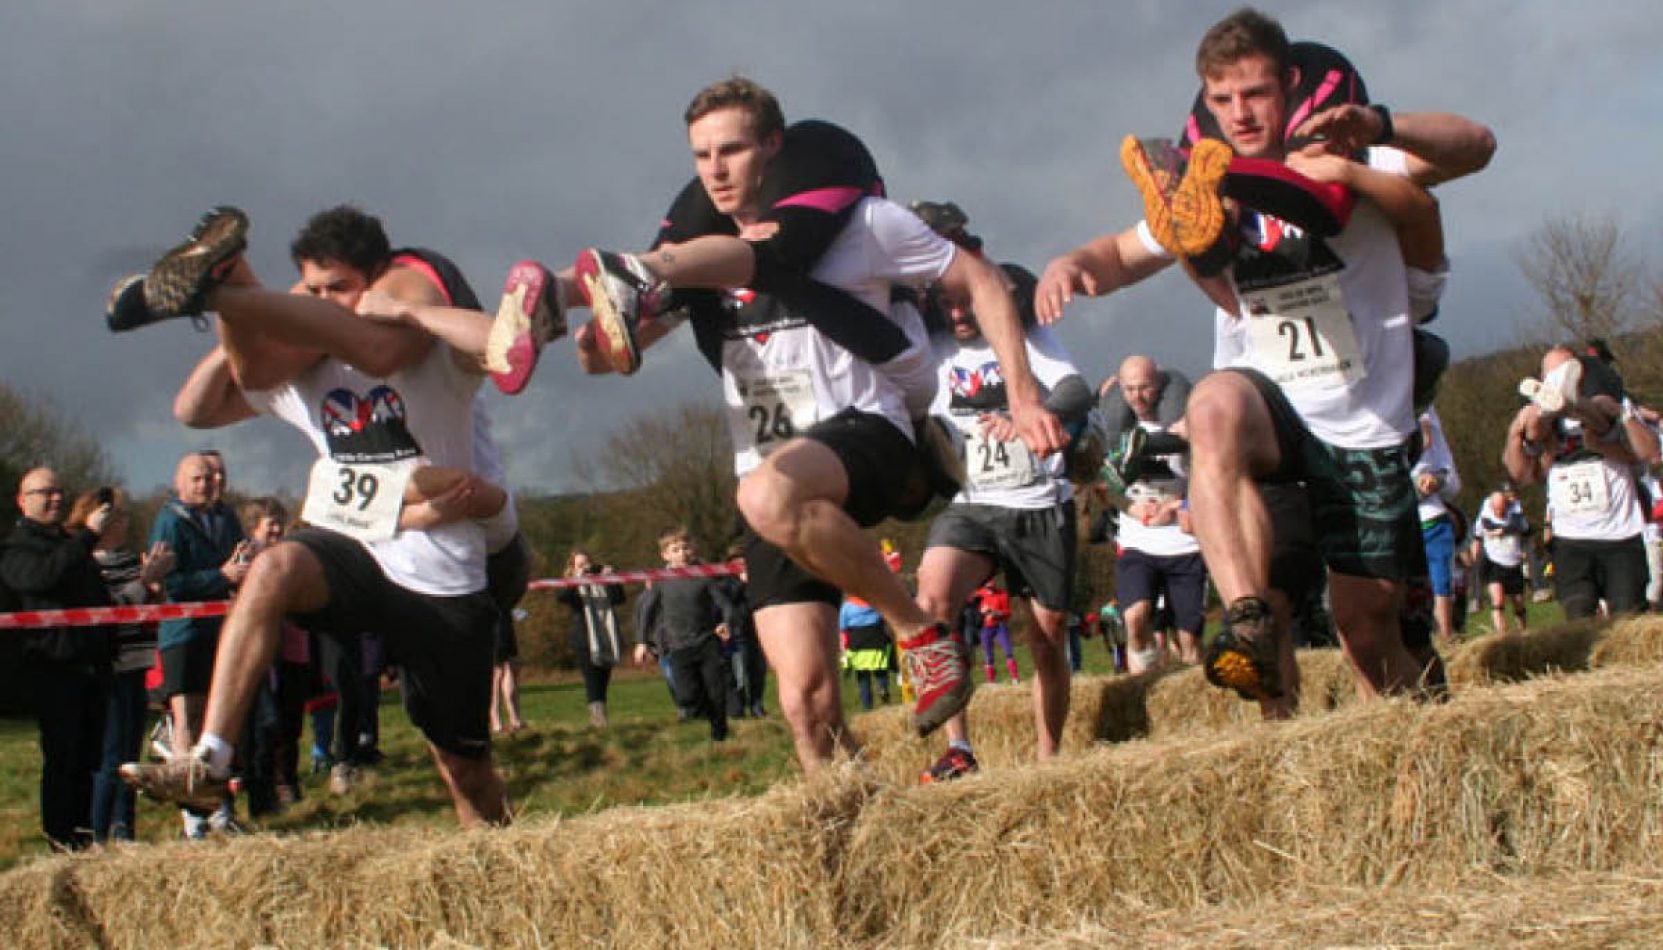 wife carrying race uk, whats on this week, april 22, whats on, guide to whats on, guide to surrey, whats on this week, entertainment, family, food and drink, sports, wellness, events, things to do, live music, comedy, theatre, egg hunts, easter